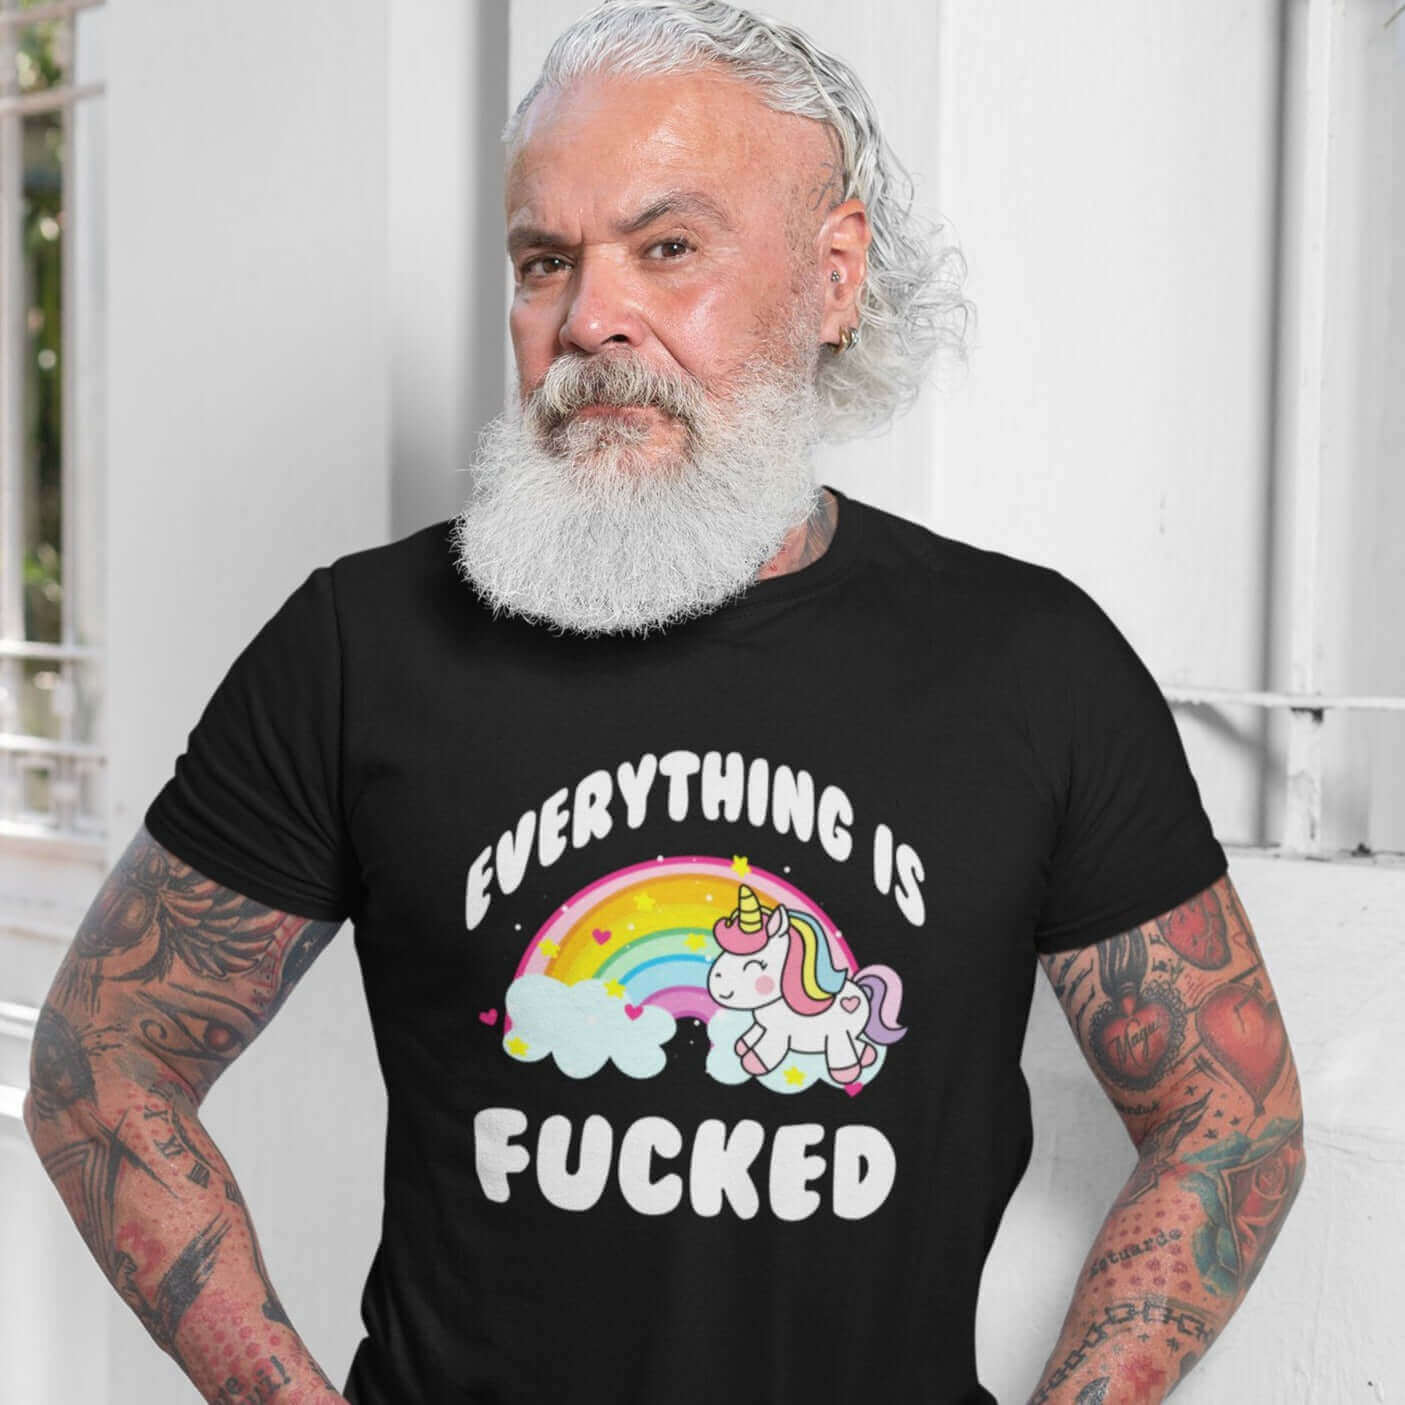 Tattooed older man with a beard wearing a black t-shirt with a graphic of a kawaii style unicorn and a pastel rainbow with the words Everything is fucked printed on the front.